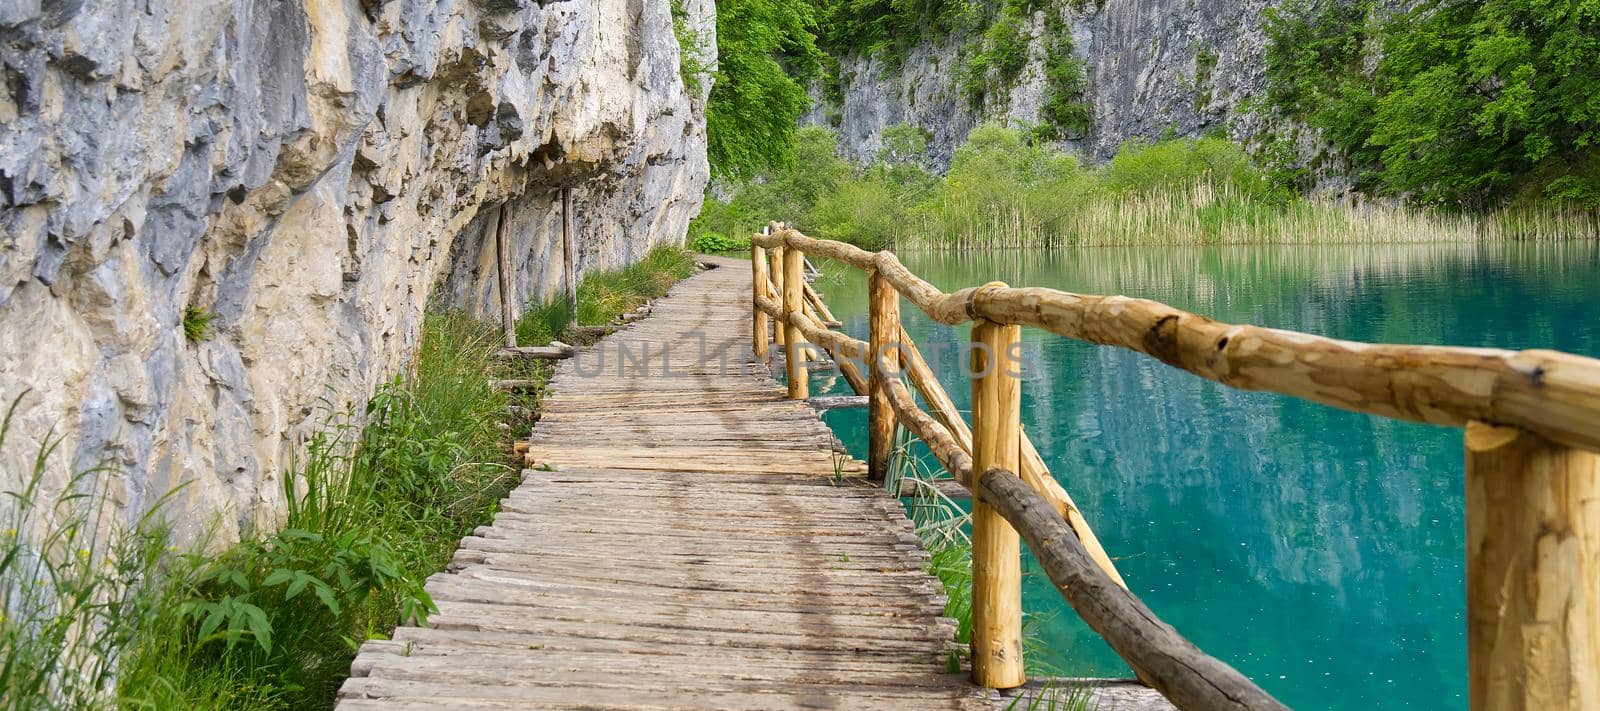 View of wooden deck among tall green grass with rock behind and bushes in Plitvice Lakes National Park in Croatia by PhotoTime